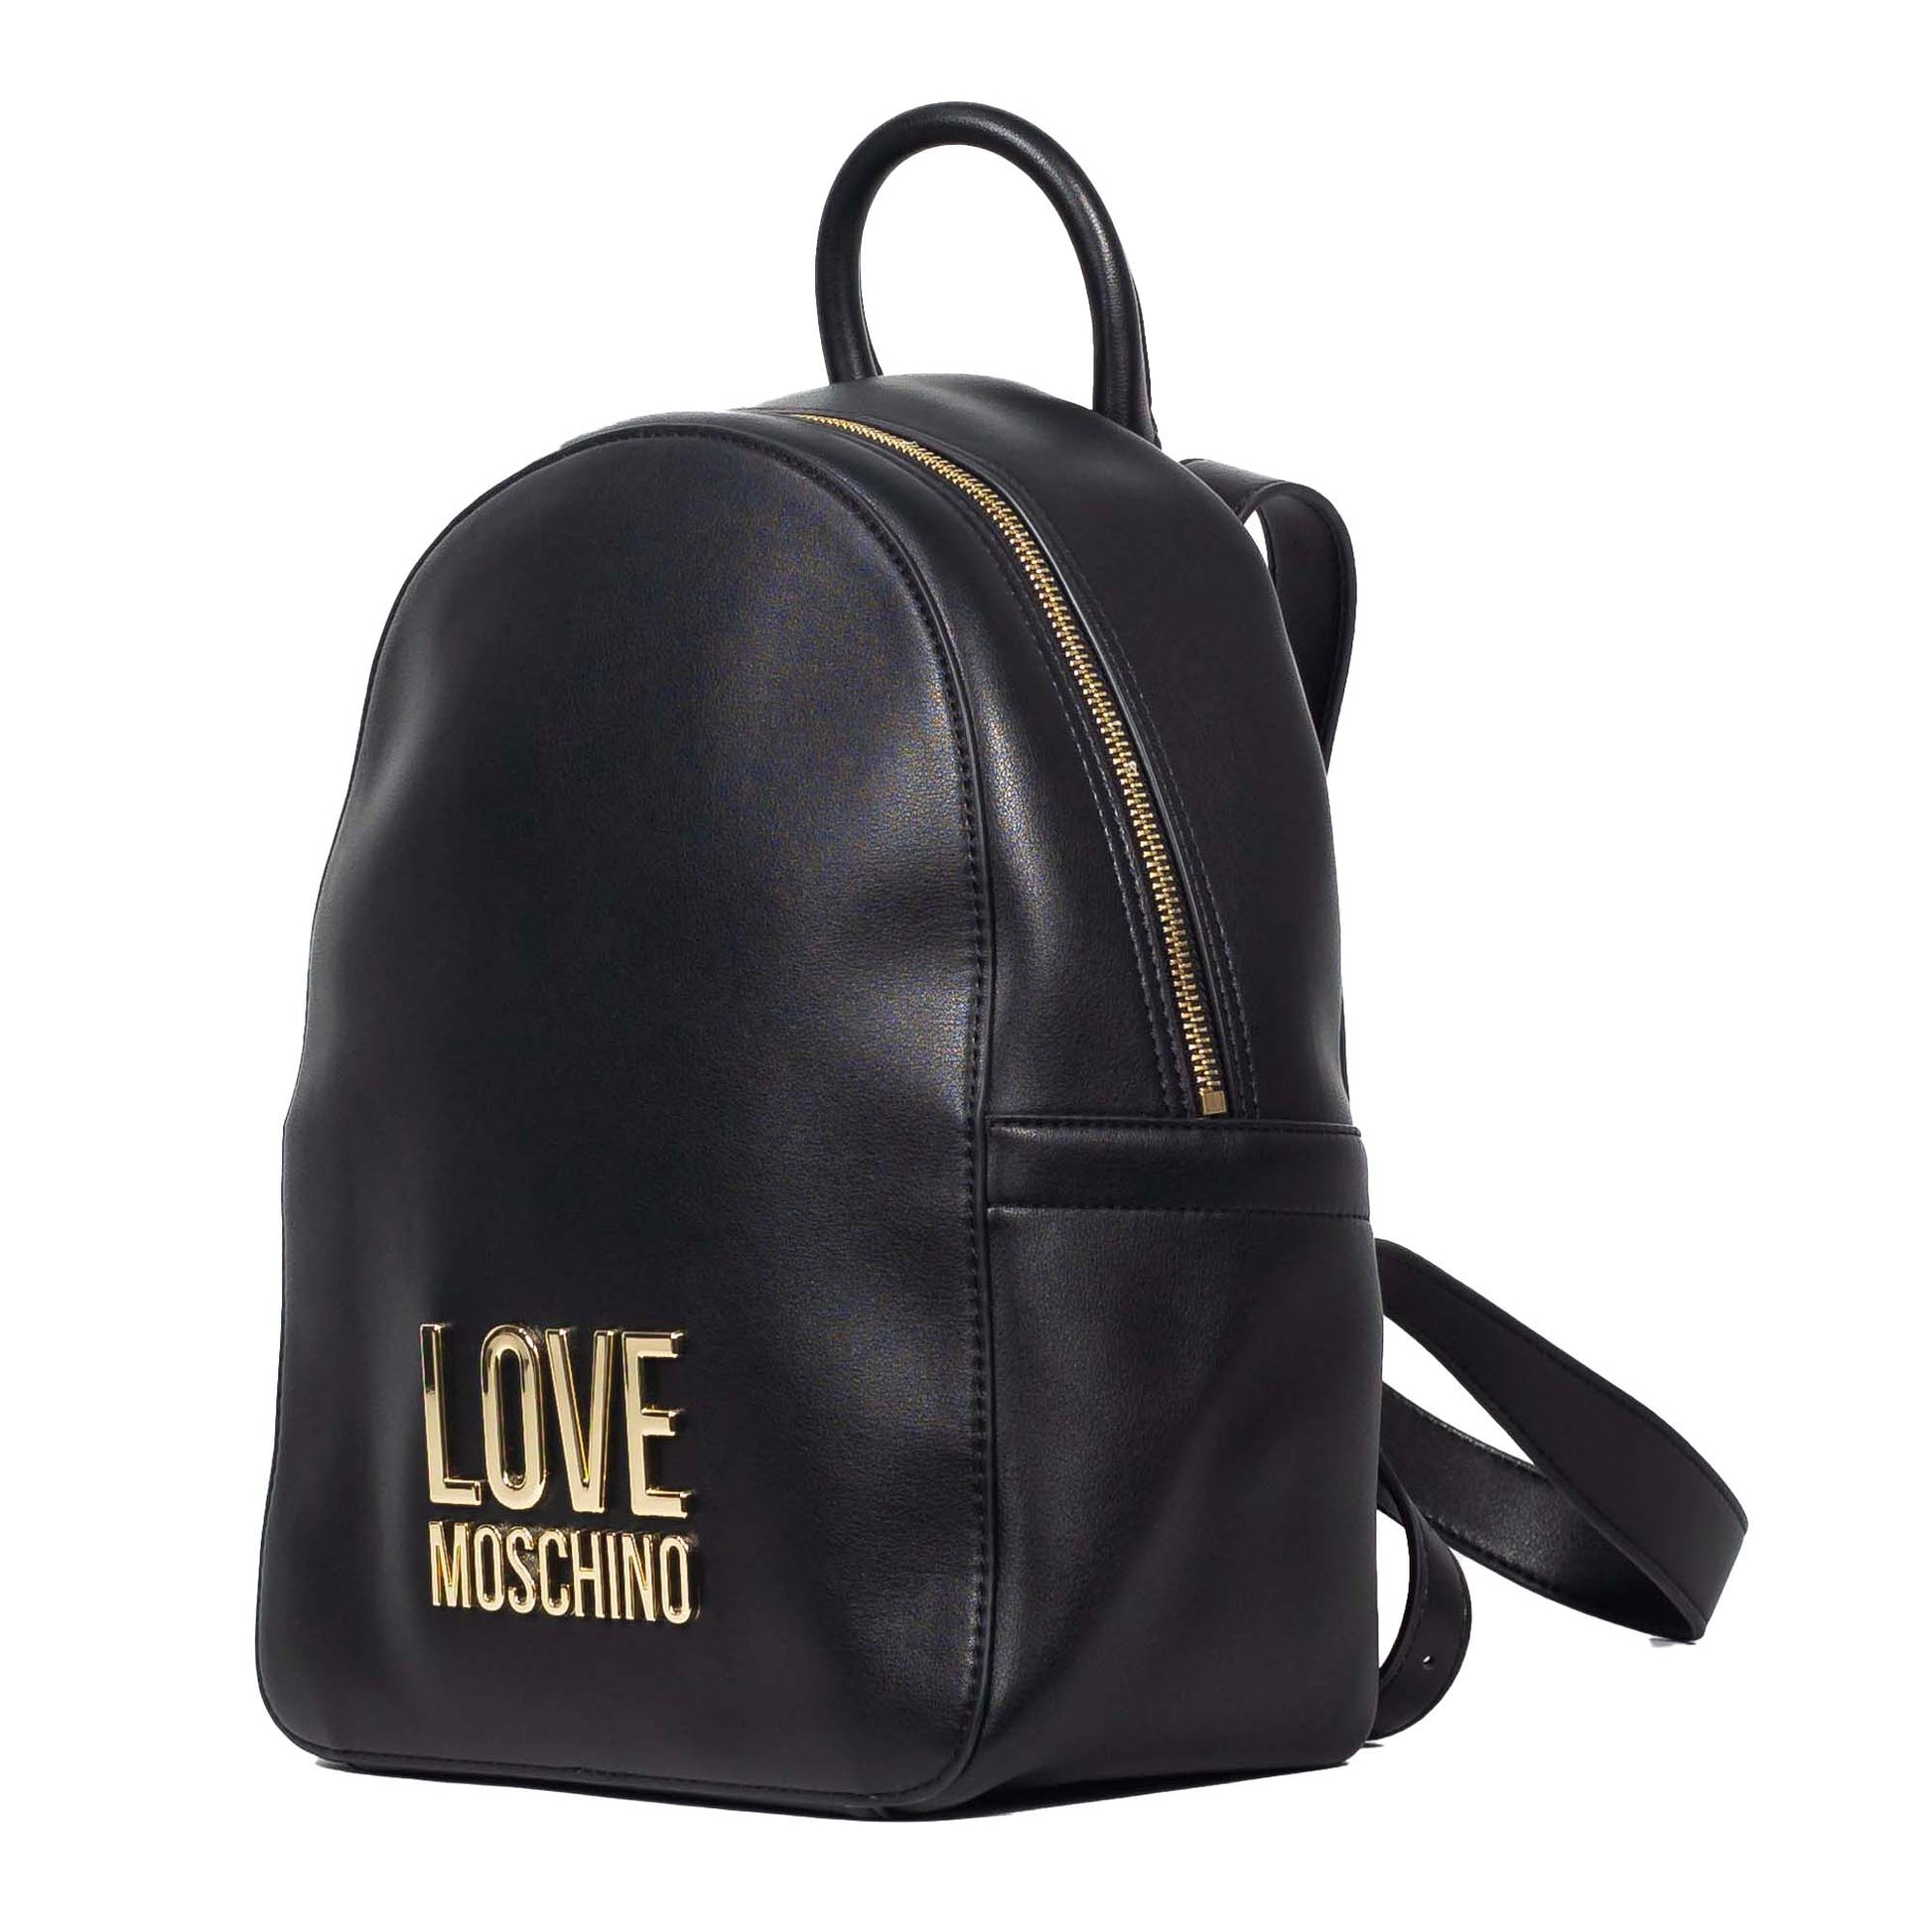 Love Moschino Faux Leather Black Backpack - JC4109PP1FLJ000A - 8054400949454